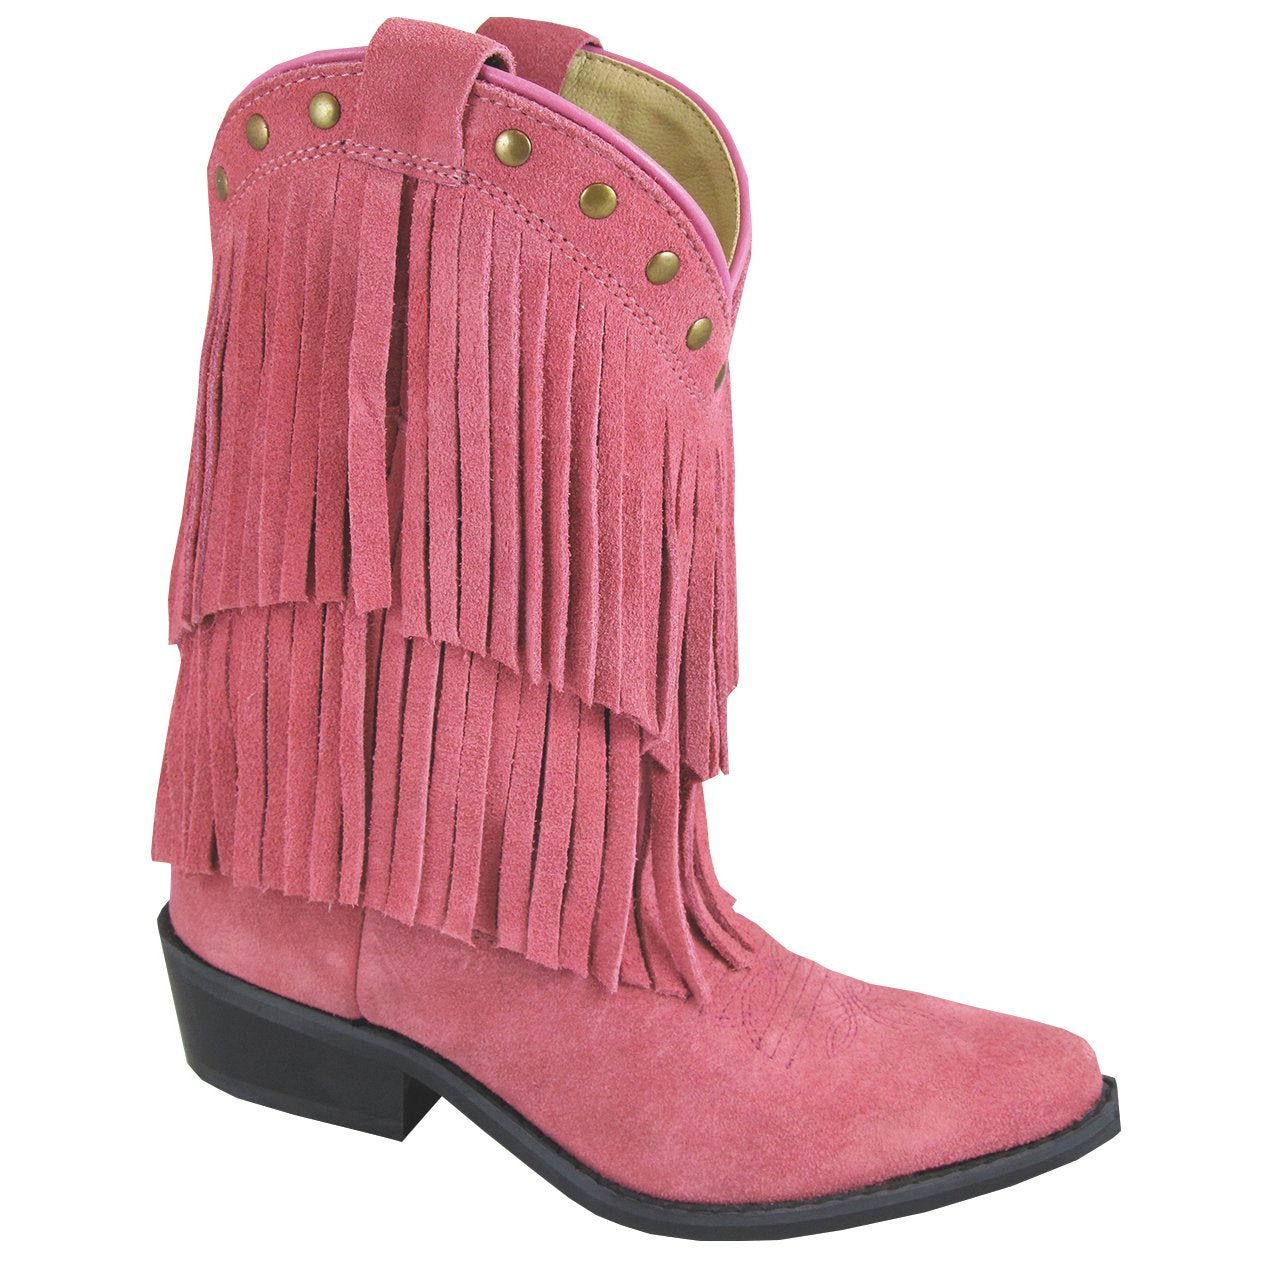 Smoky Mountain Girl's Youth Wisteria Pink Double Fringe Boot